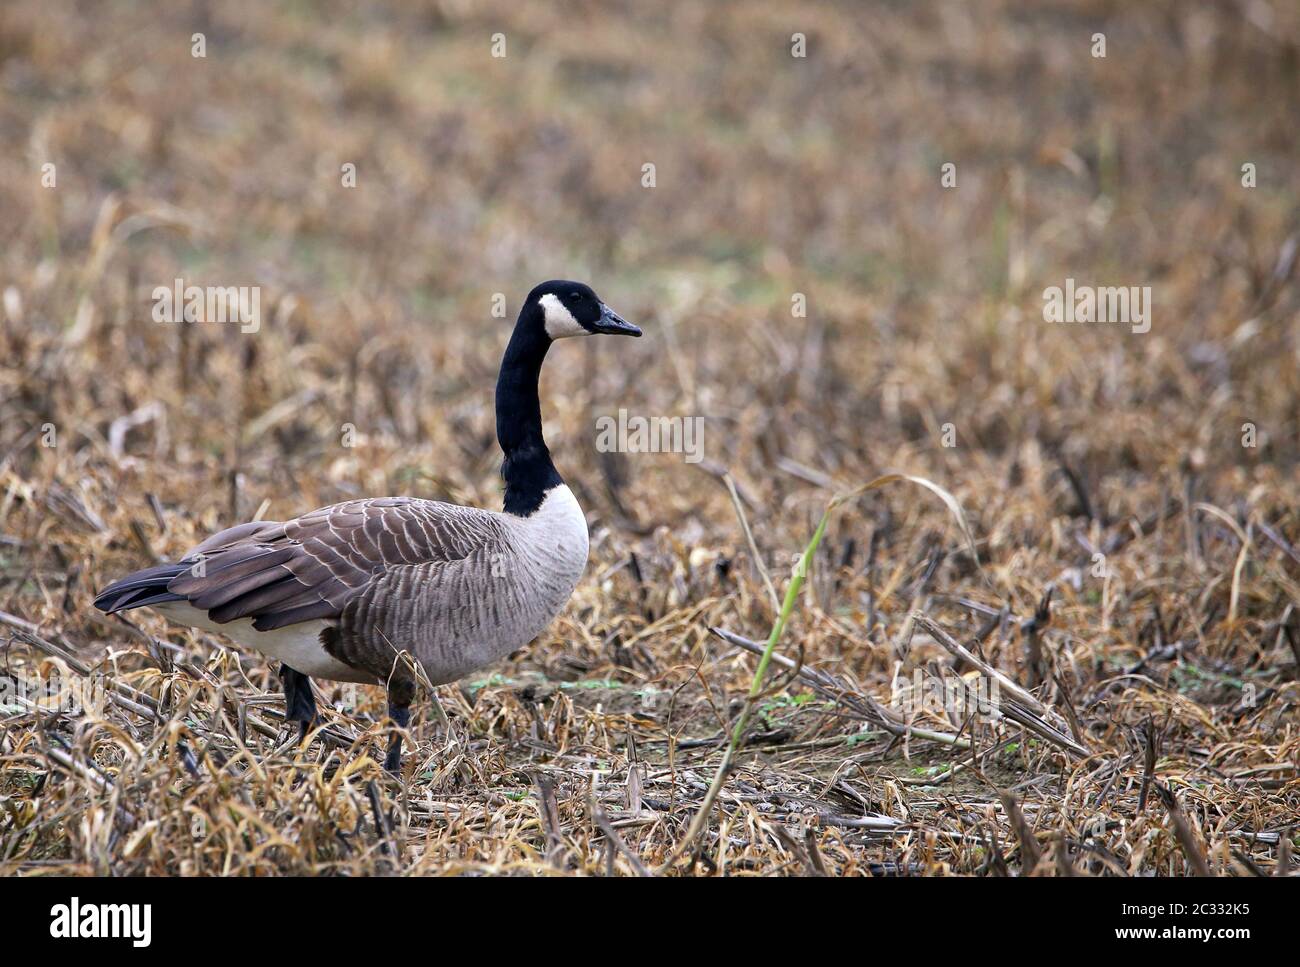 Canada goose Branta canadensis on harvested field Stock Photo